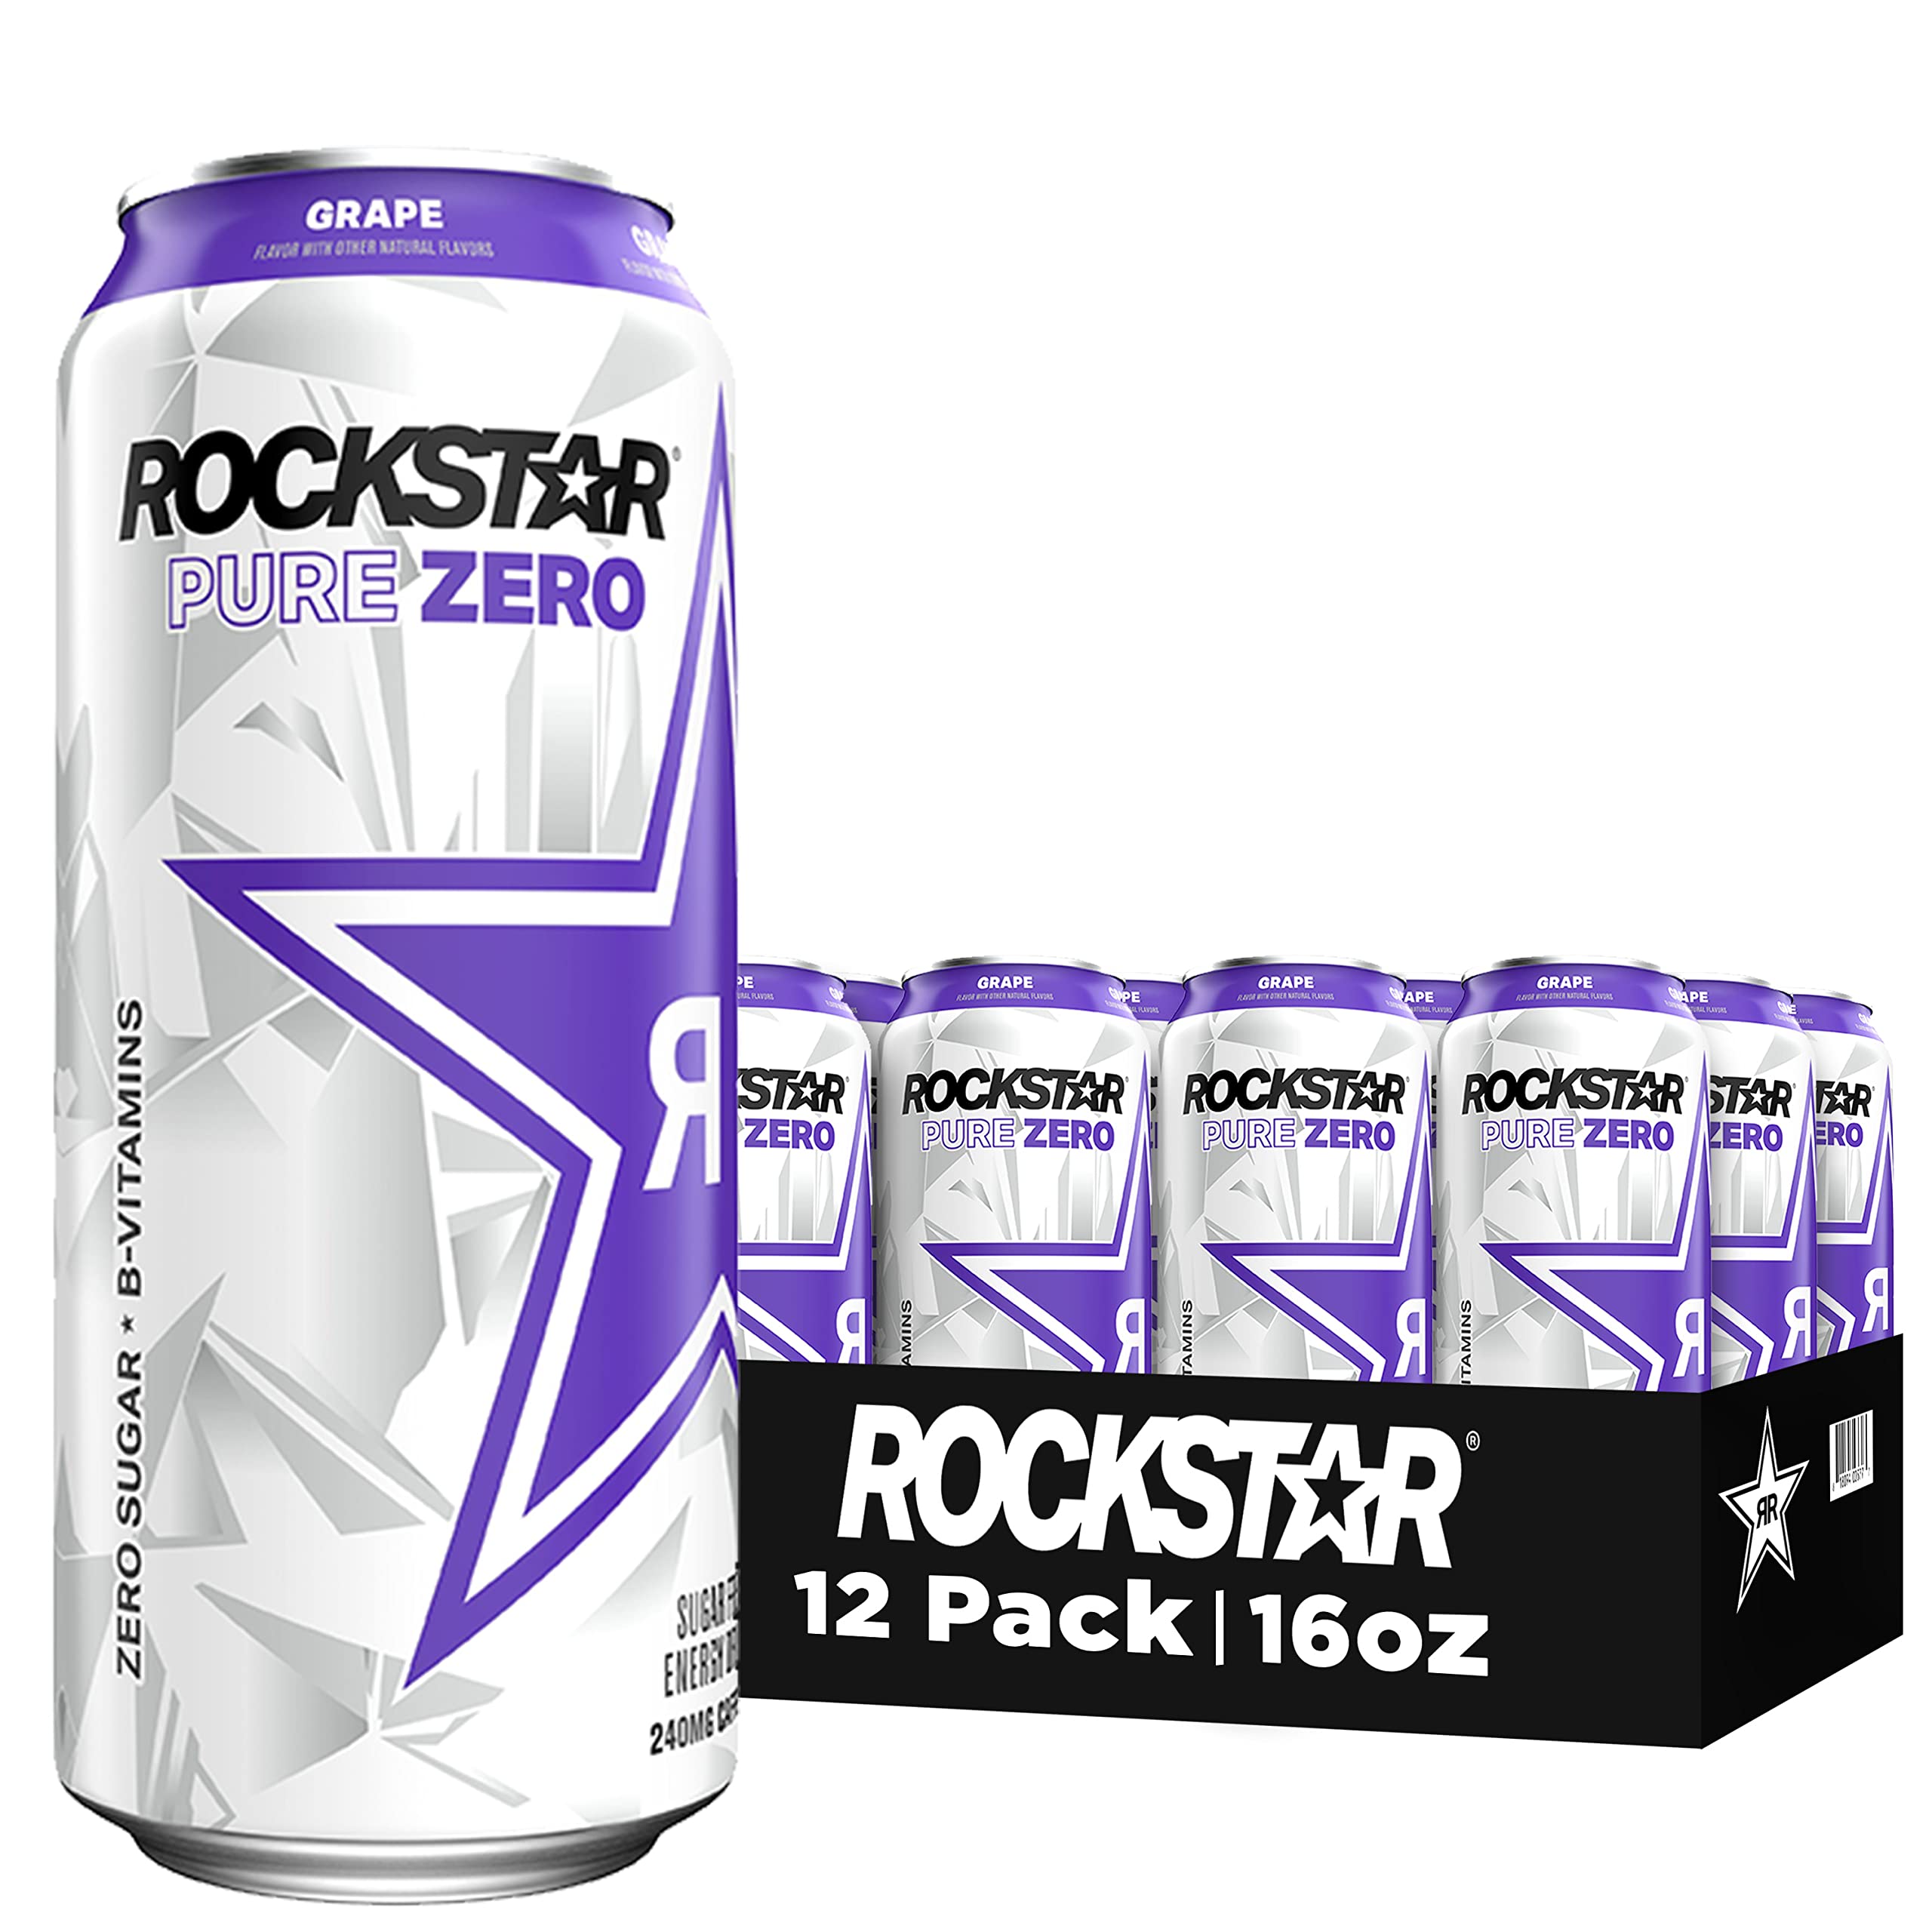 12-Pack 16-Oz Rockstar Pure Zero Energy Drink (Grape) $14.25 w/ S&S + Free Shipping w/ Prime or on orders over $35